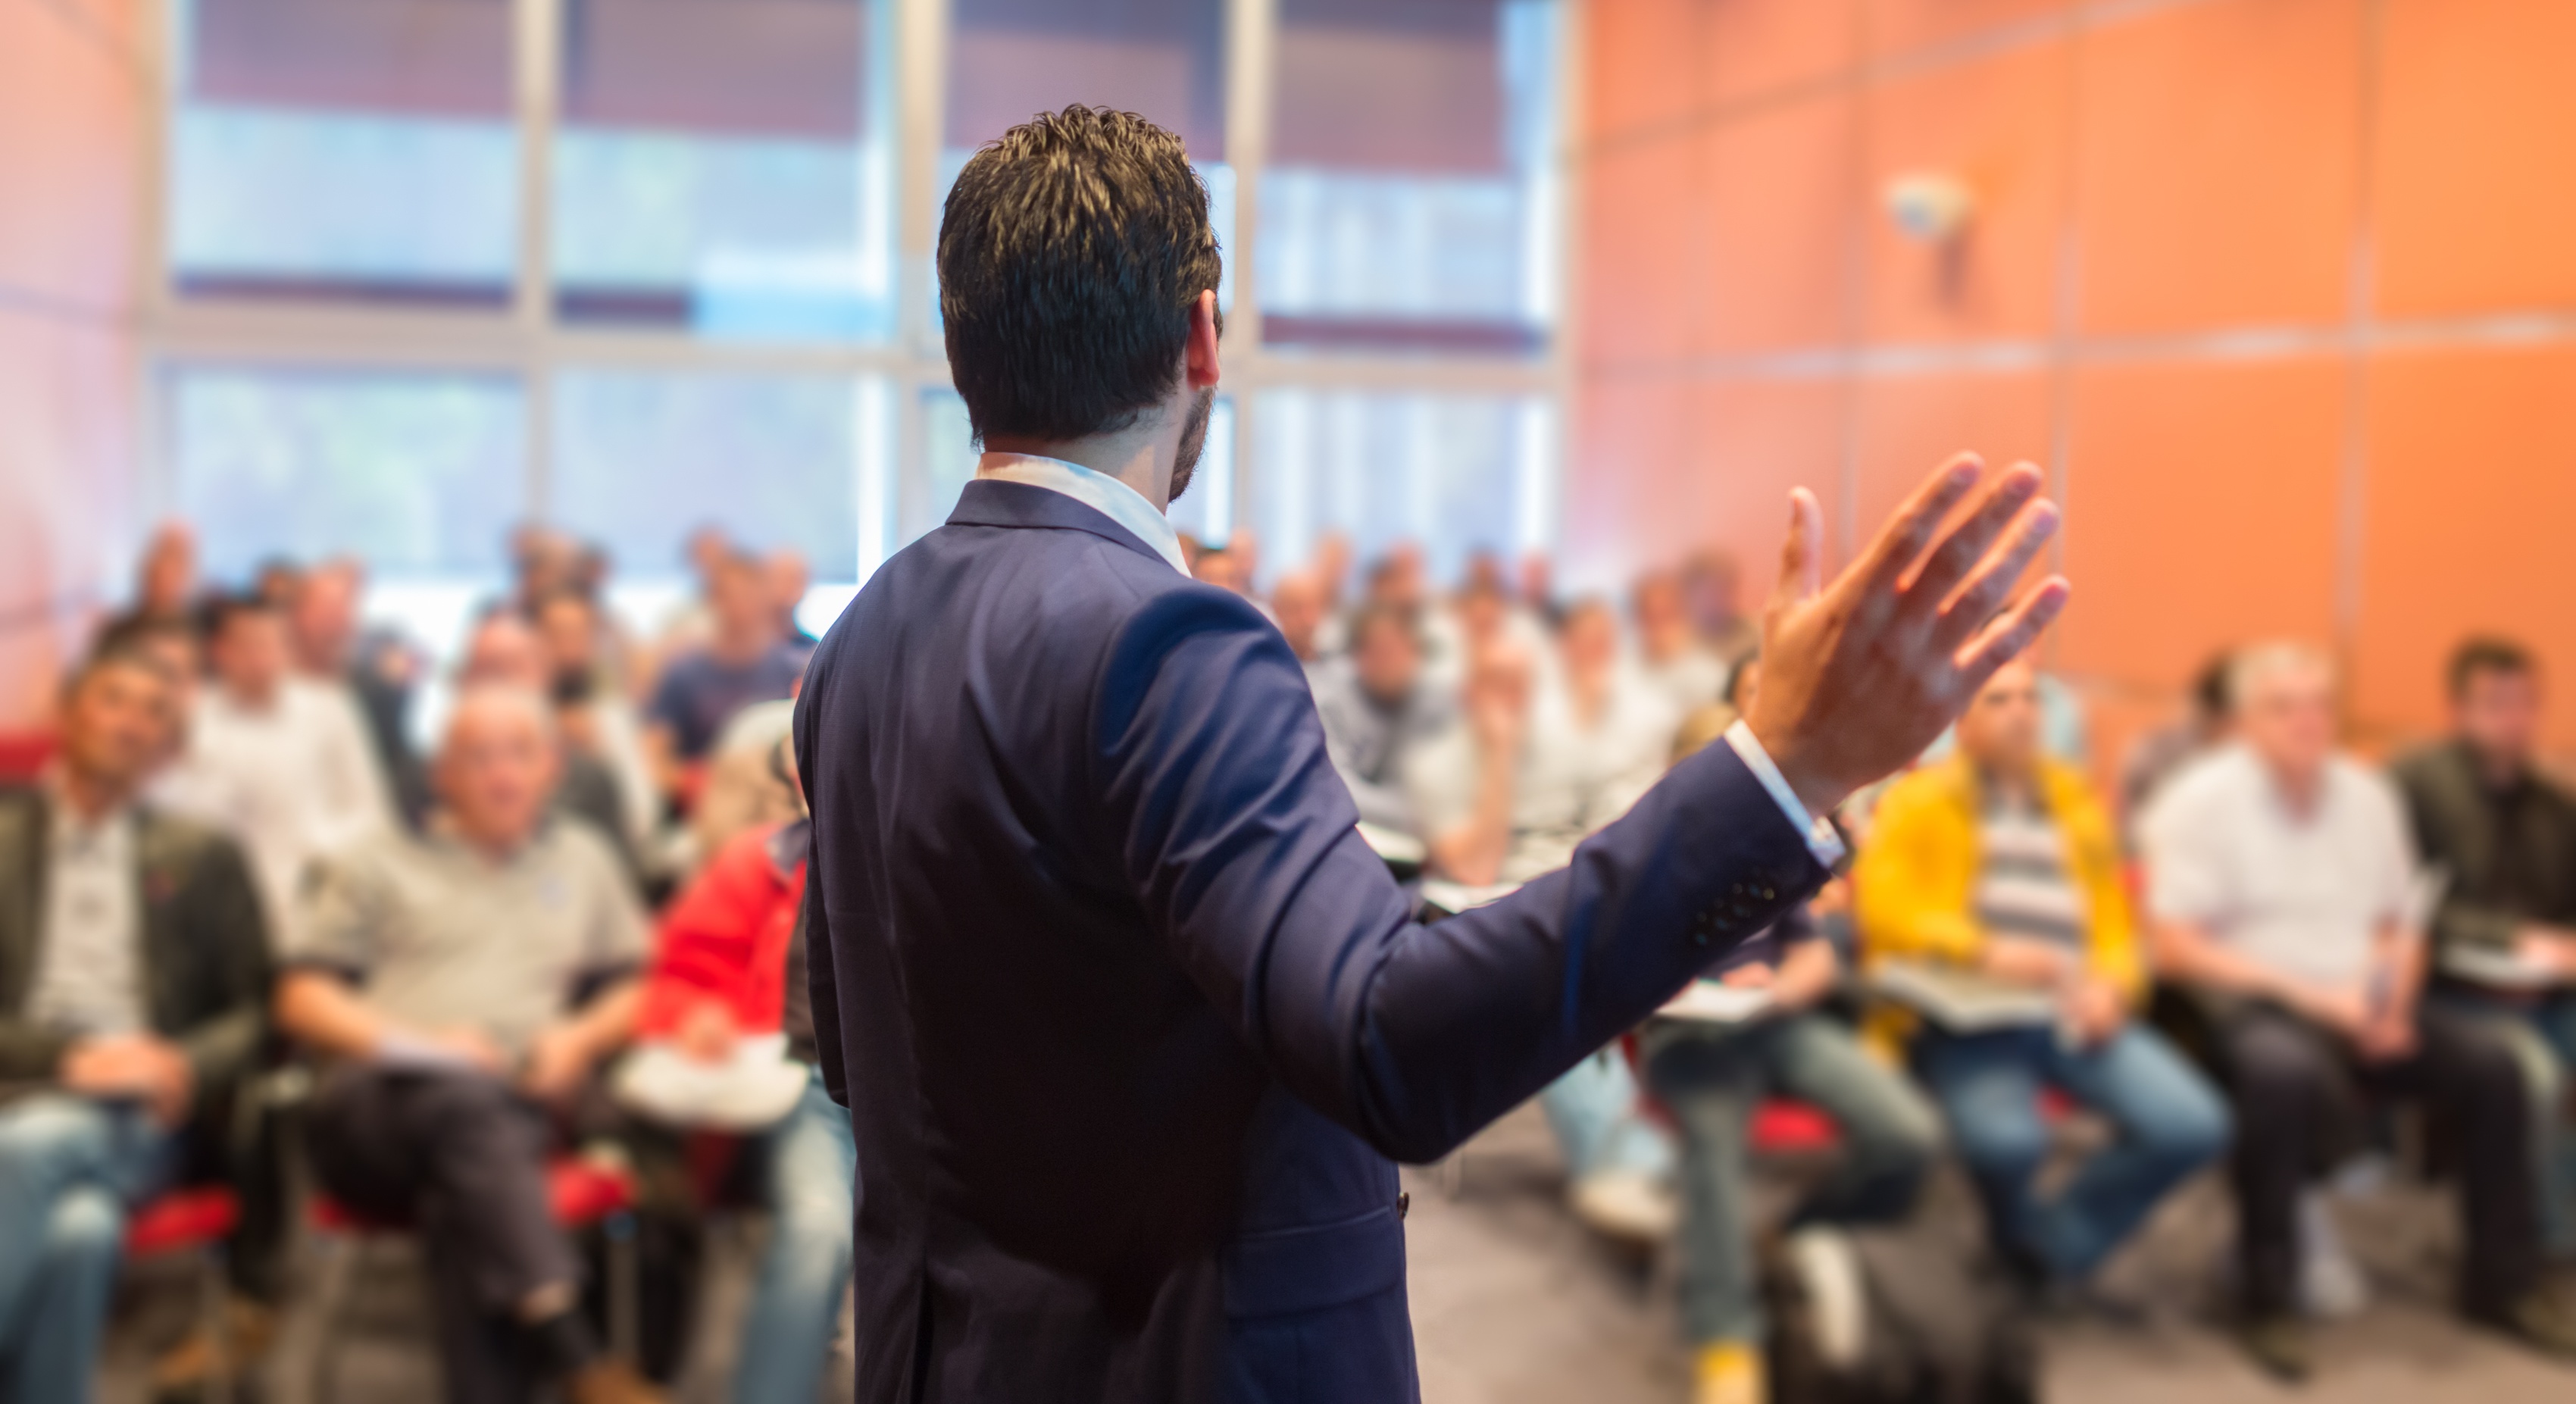 Selecting the Right Keynote Speaker that Aligns to Your Company’s Goals